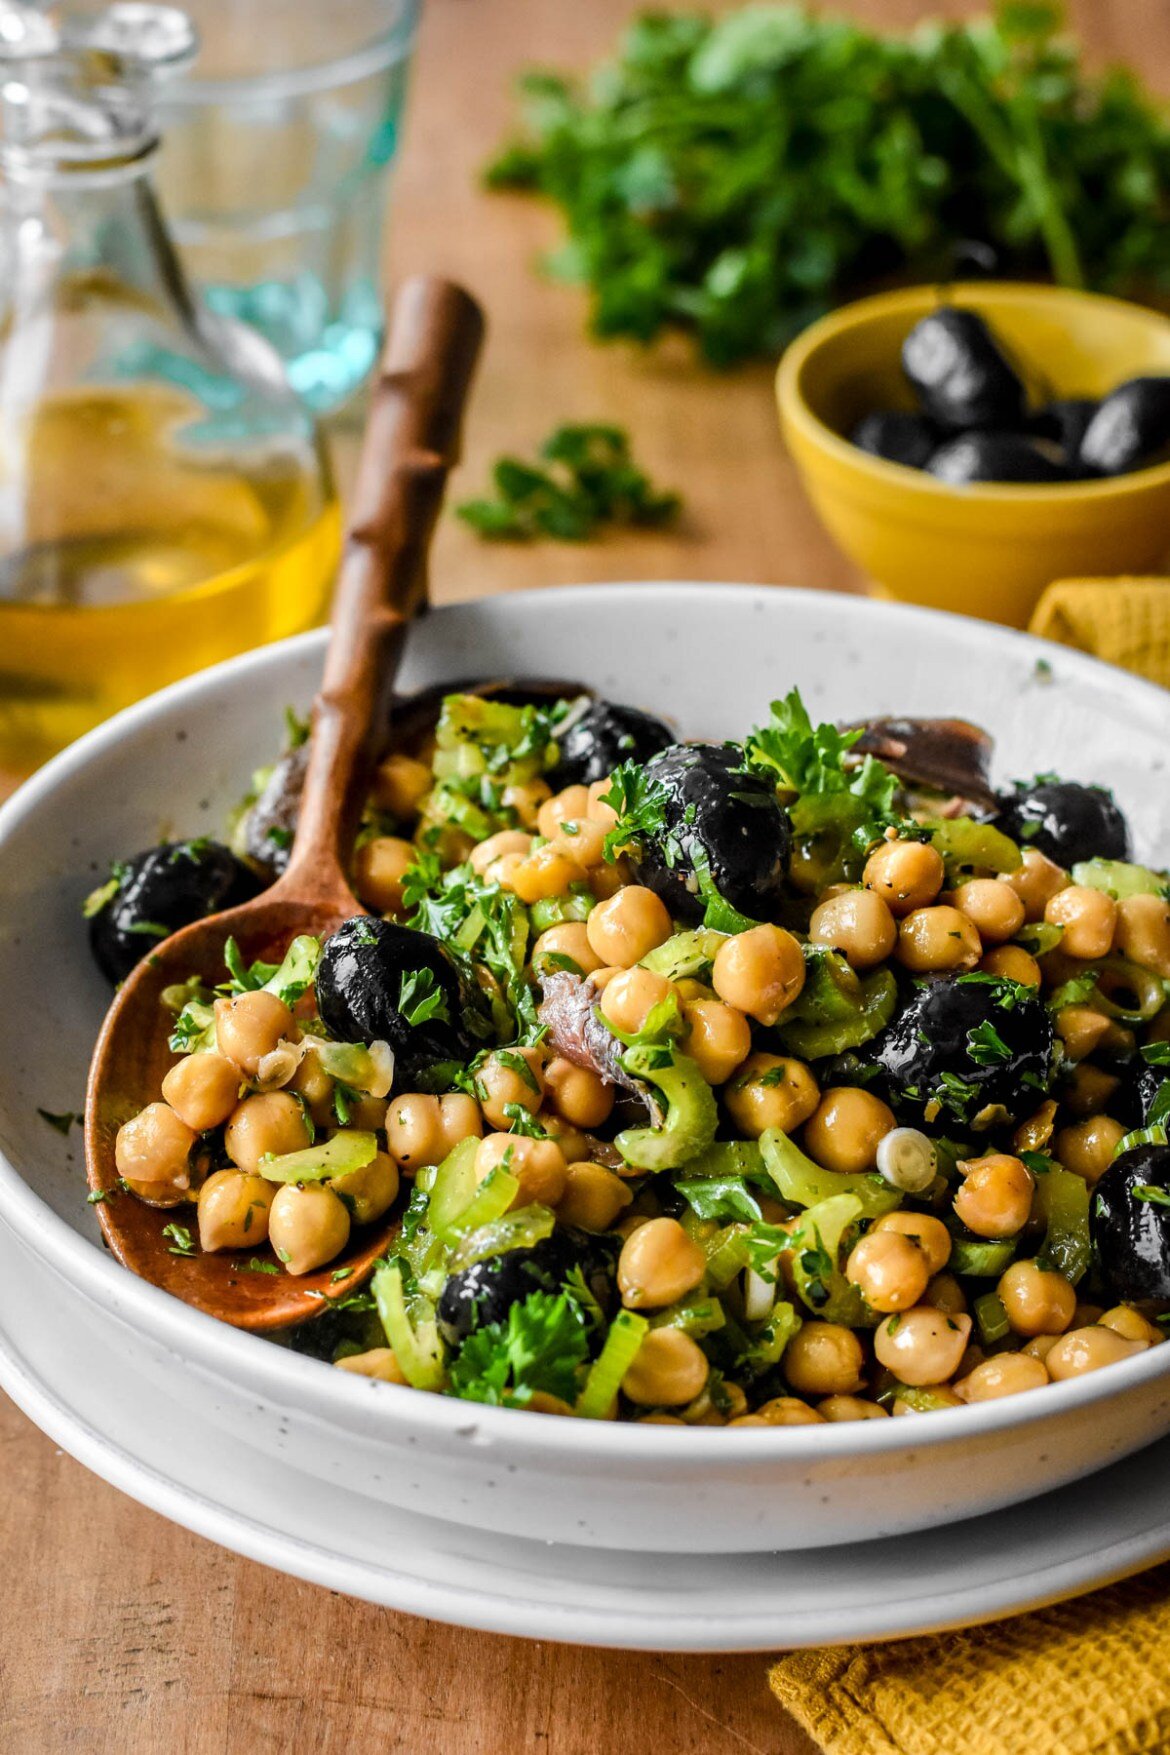 Provençal Chickpea Salad with Olives, Anchovies and Celery